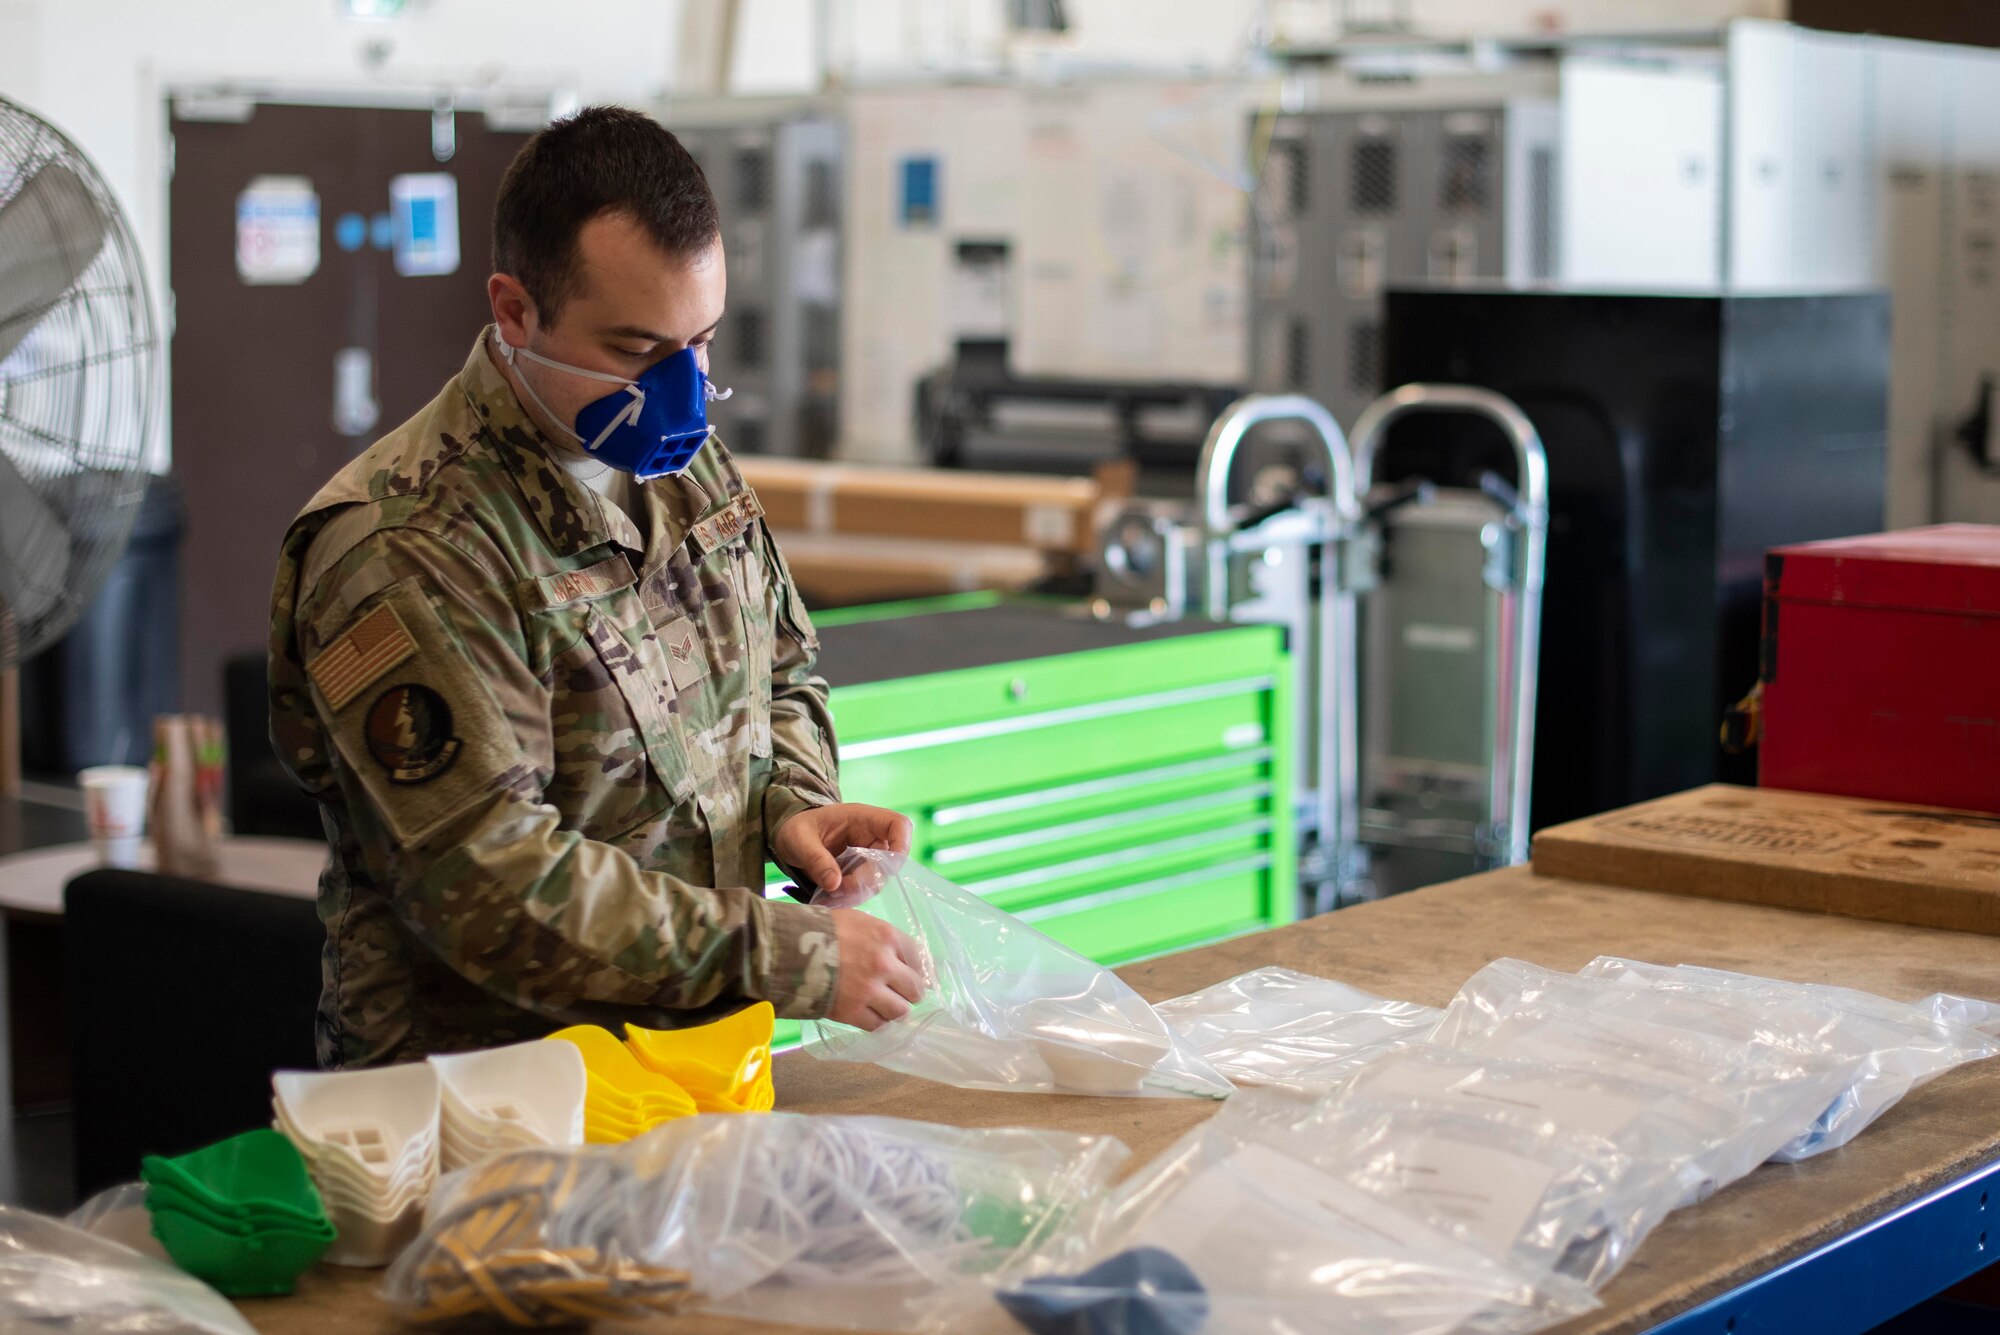 U.S. Air Force Senior Airman Carl Martin, support technician assigned to the 352d Special Operations Aircraft Maintenance Squadron, 352d Special Operations Wing, creates mask kits, April 27, 2020, at RAF Mildenhall, England. Designed to protect wearers from COVID-19, the masks must be assembled after they are printed, a process that involves using warm water to shape the mask to the face. The 352d Special Operations Wing is the sole Air Force special operations unit in the European Theater. (U.S. Air Force photo by Airman 1st Class Joseph Barron)